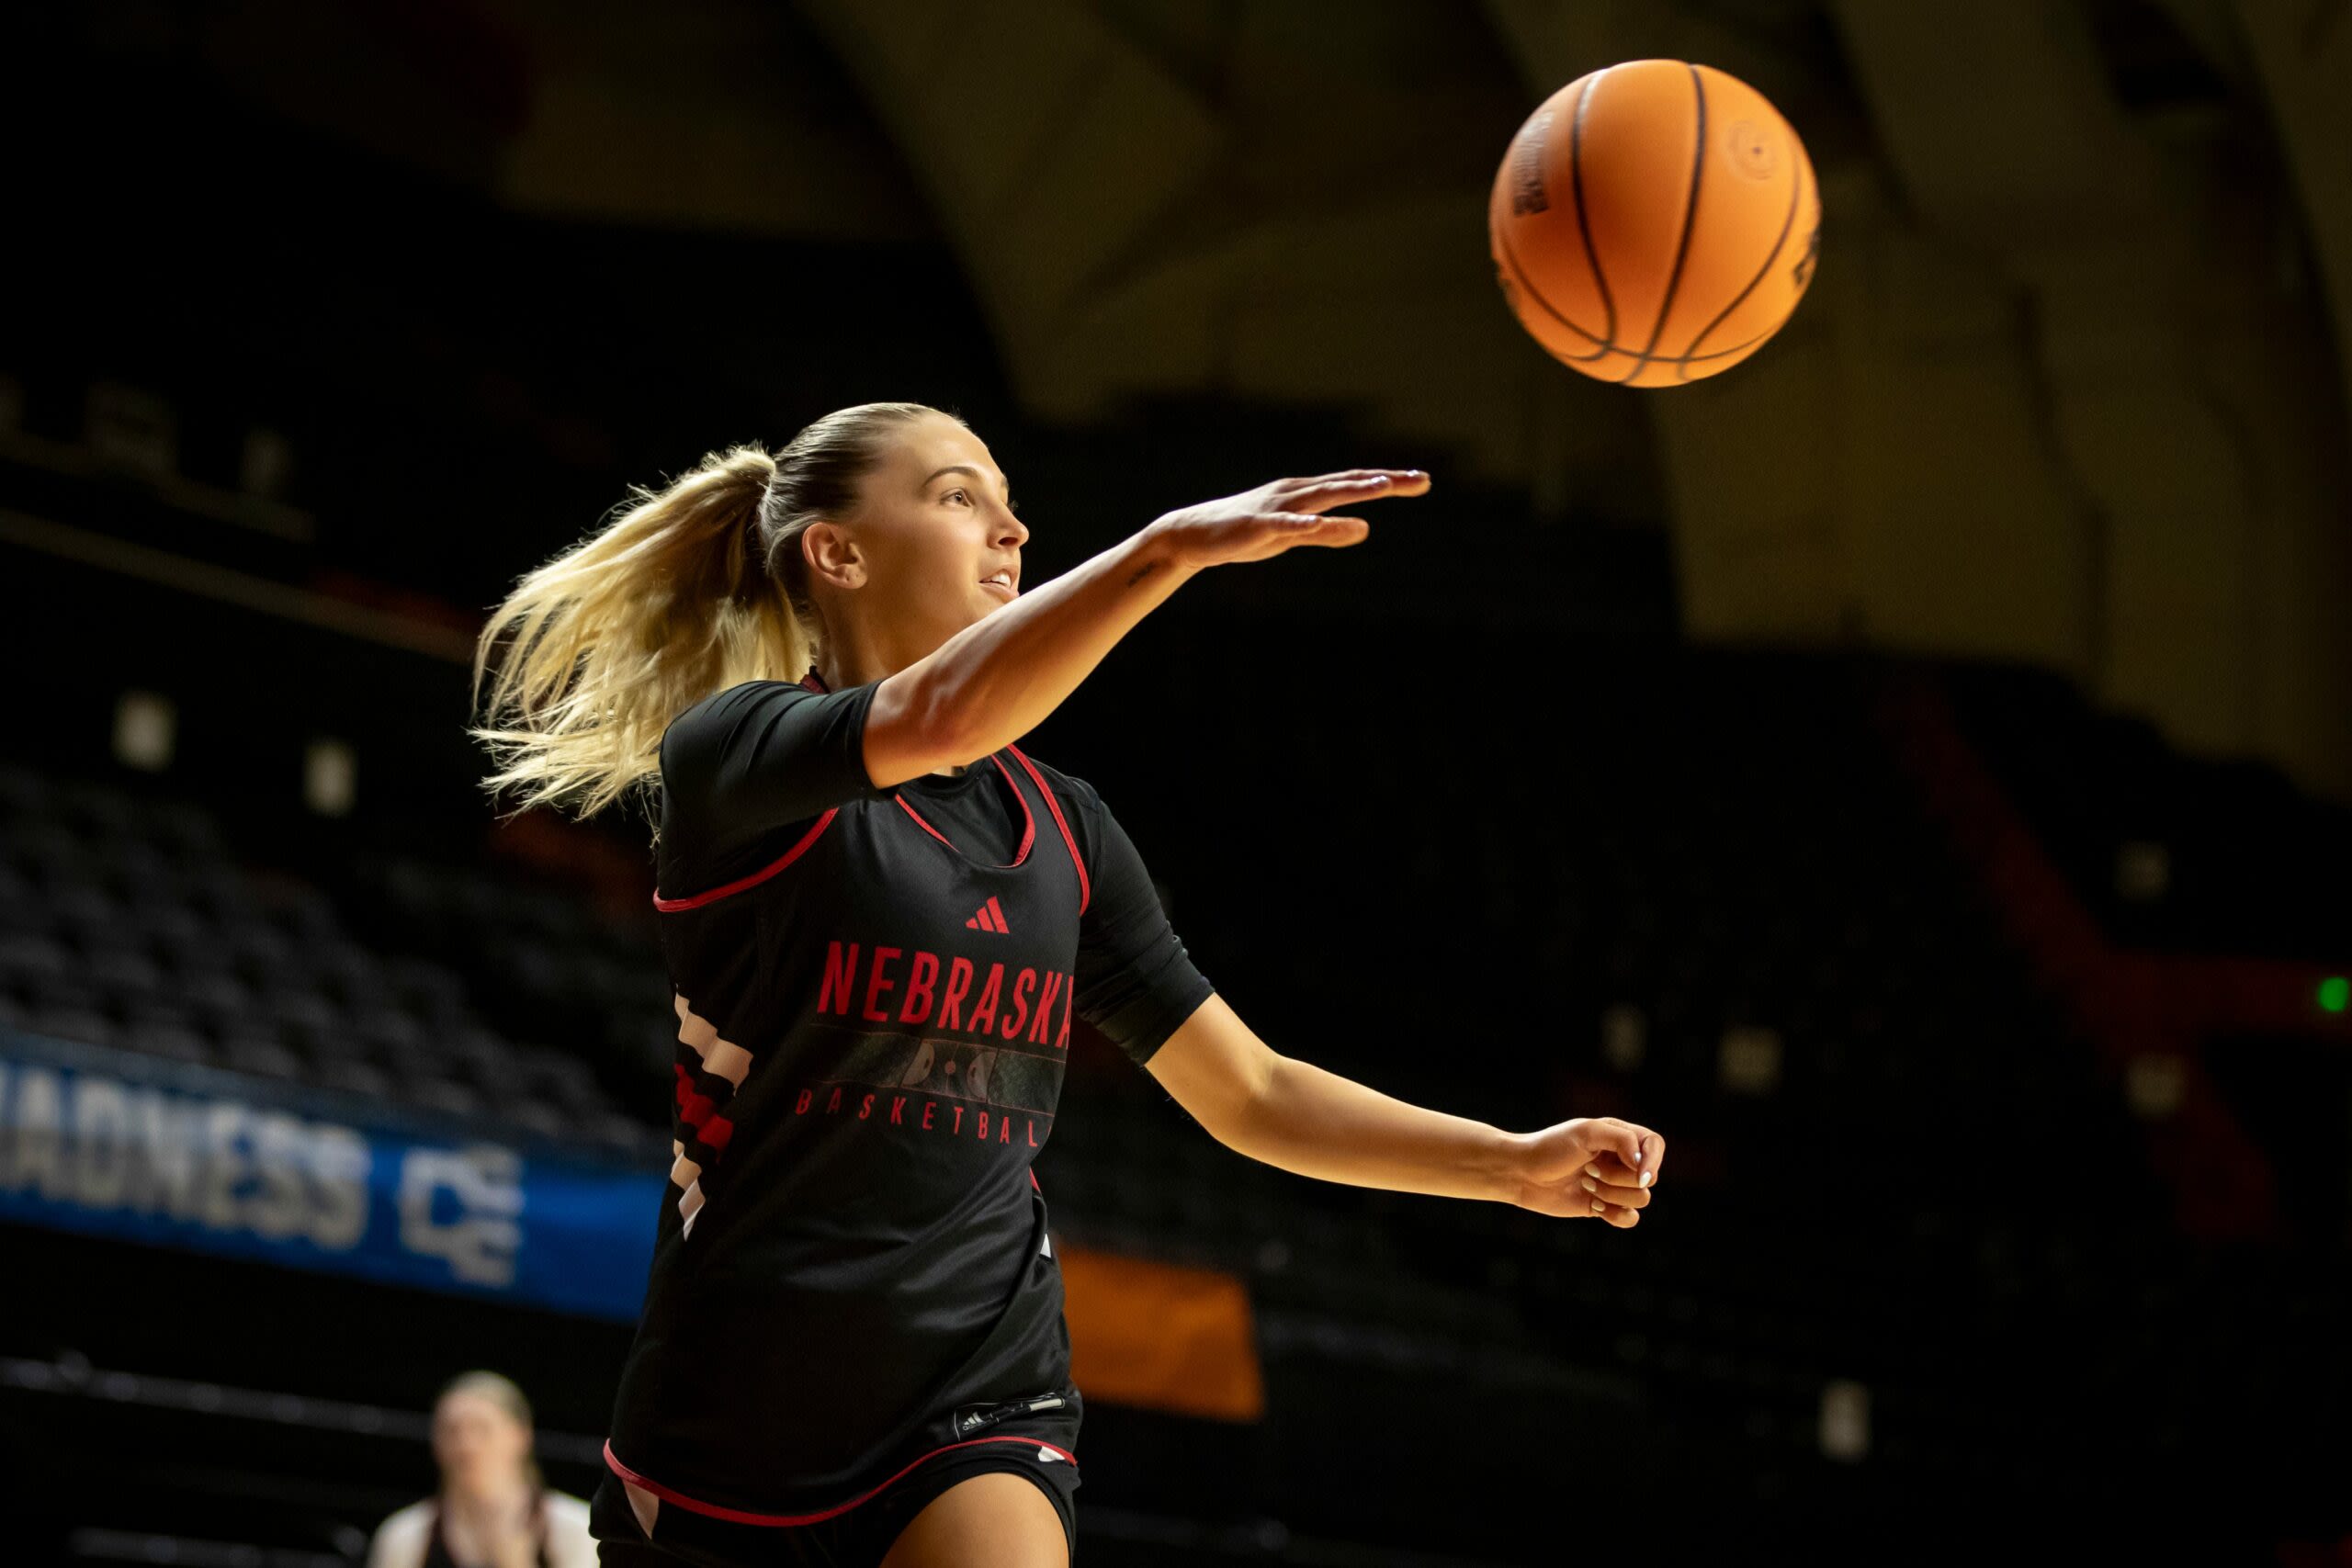 Shelley signs with Australian professional basketball team